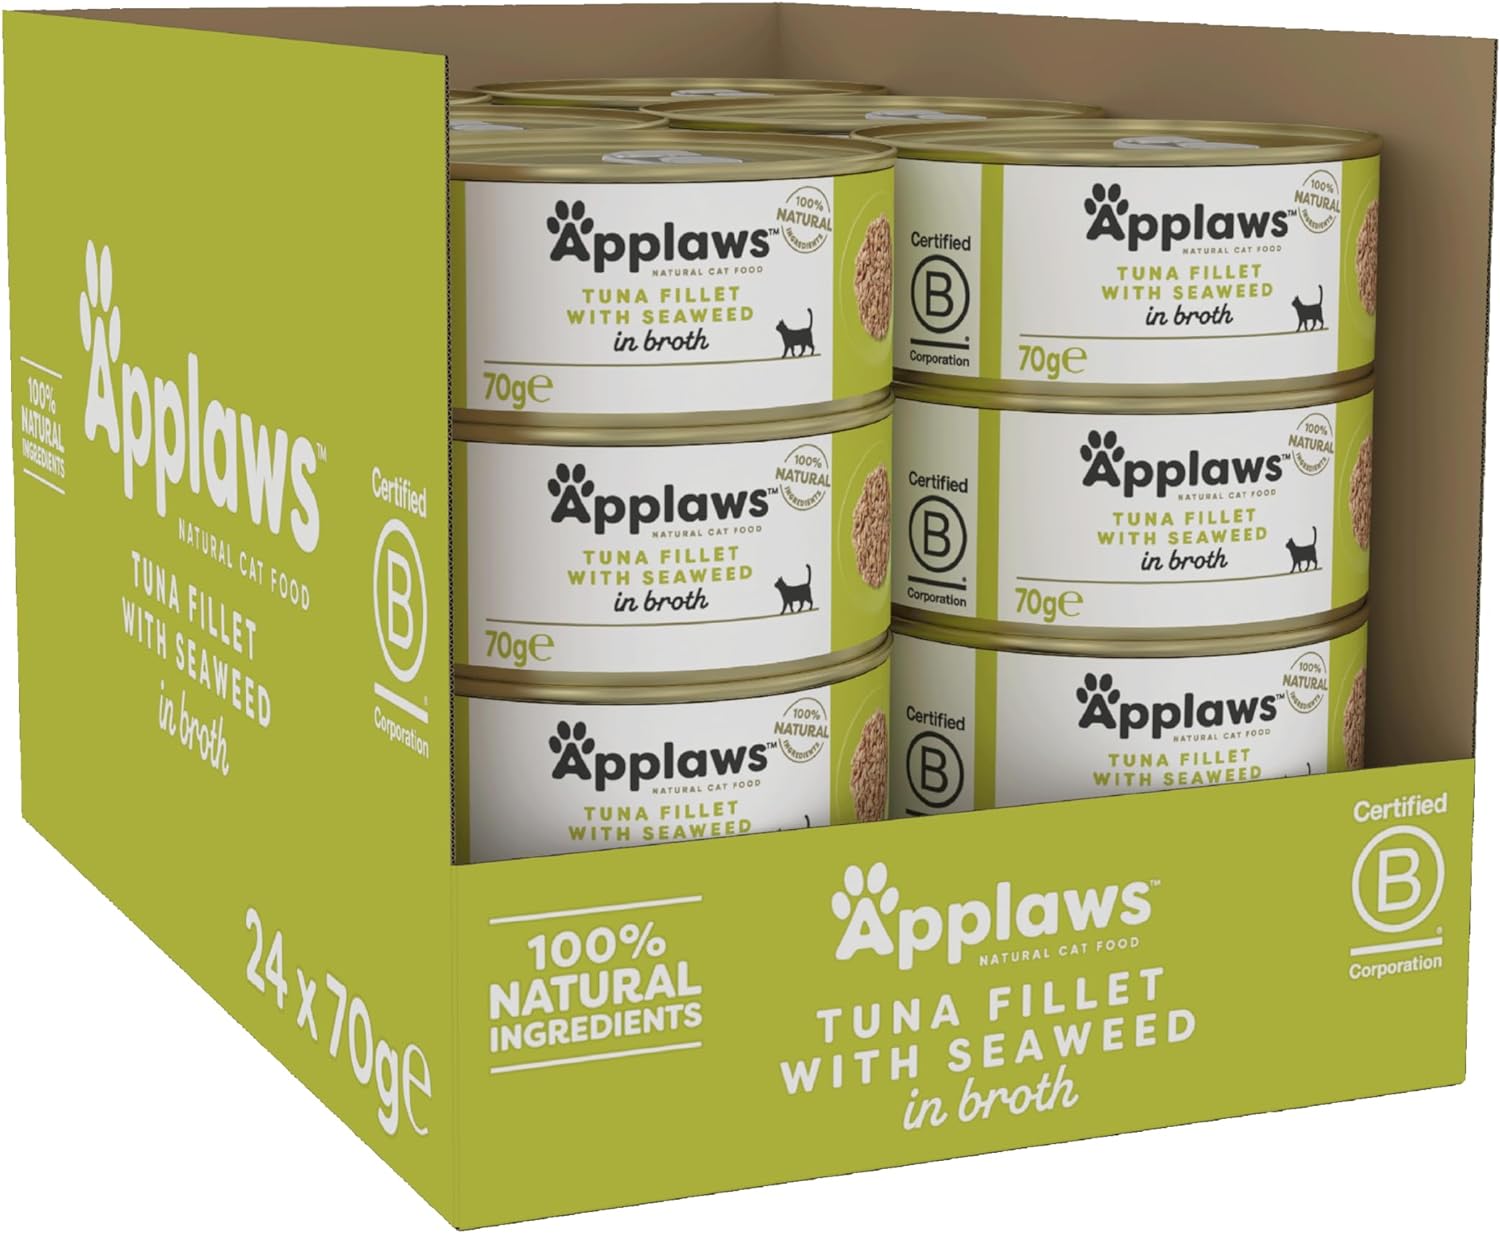 Applaws 100% Natural Cat Food, Tuna Fillet and Seaweed, 70 g Tin (Pack of 24)?1009NE-A